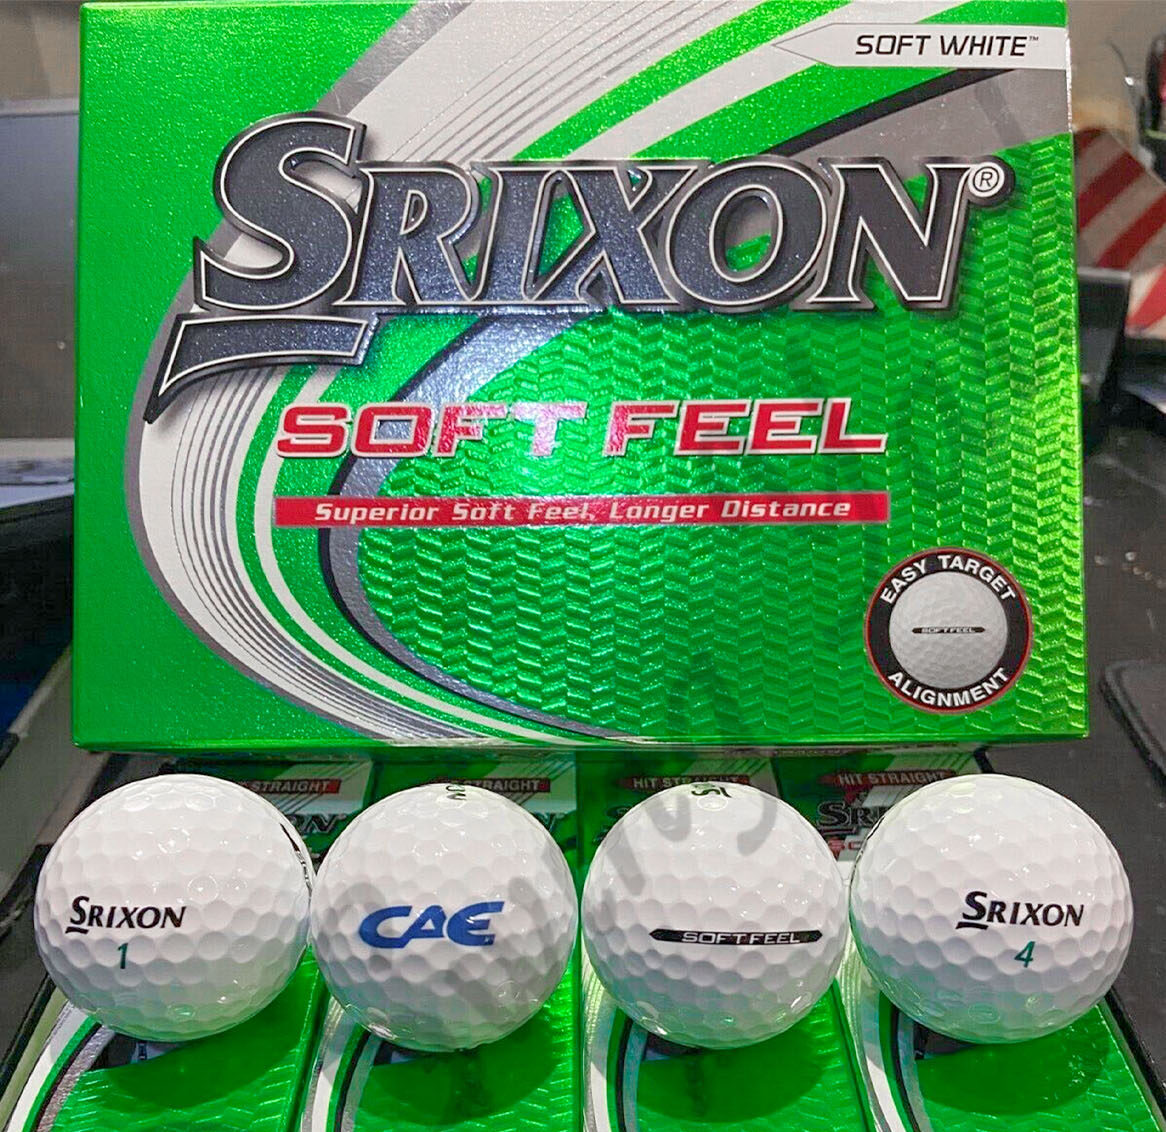 The front side box package of Srixon Soft Feel